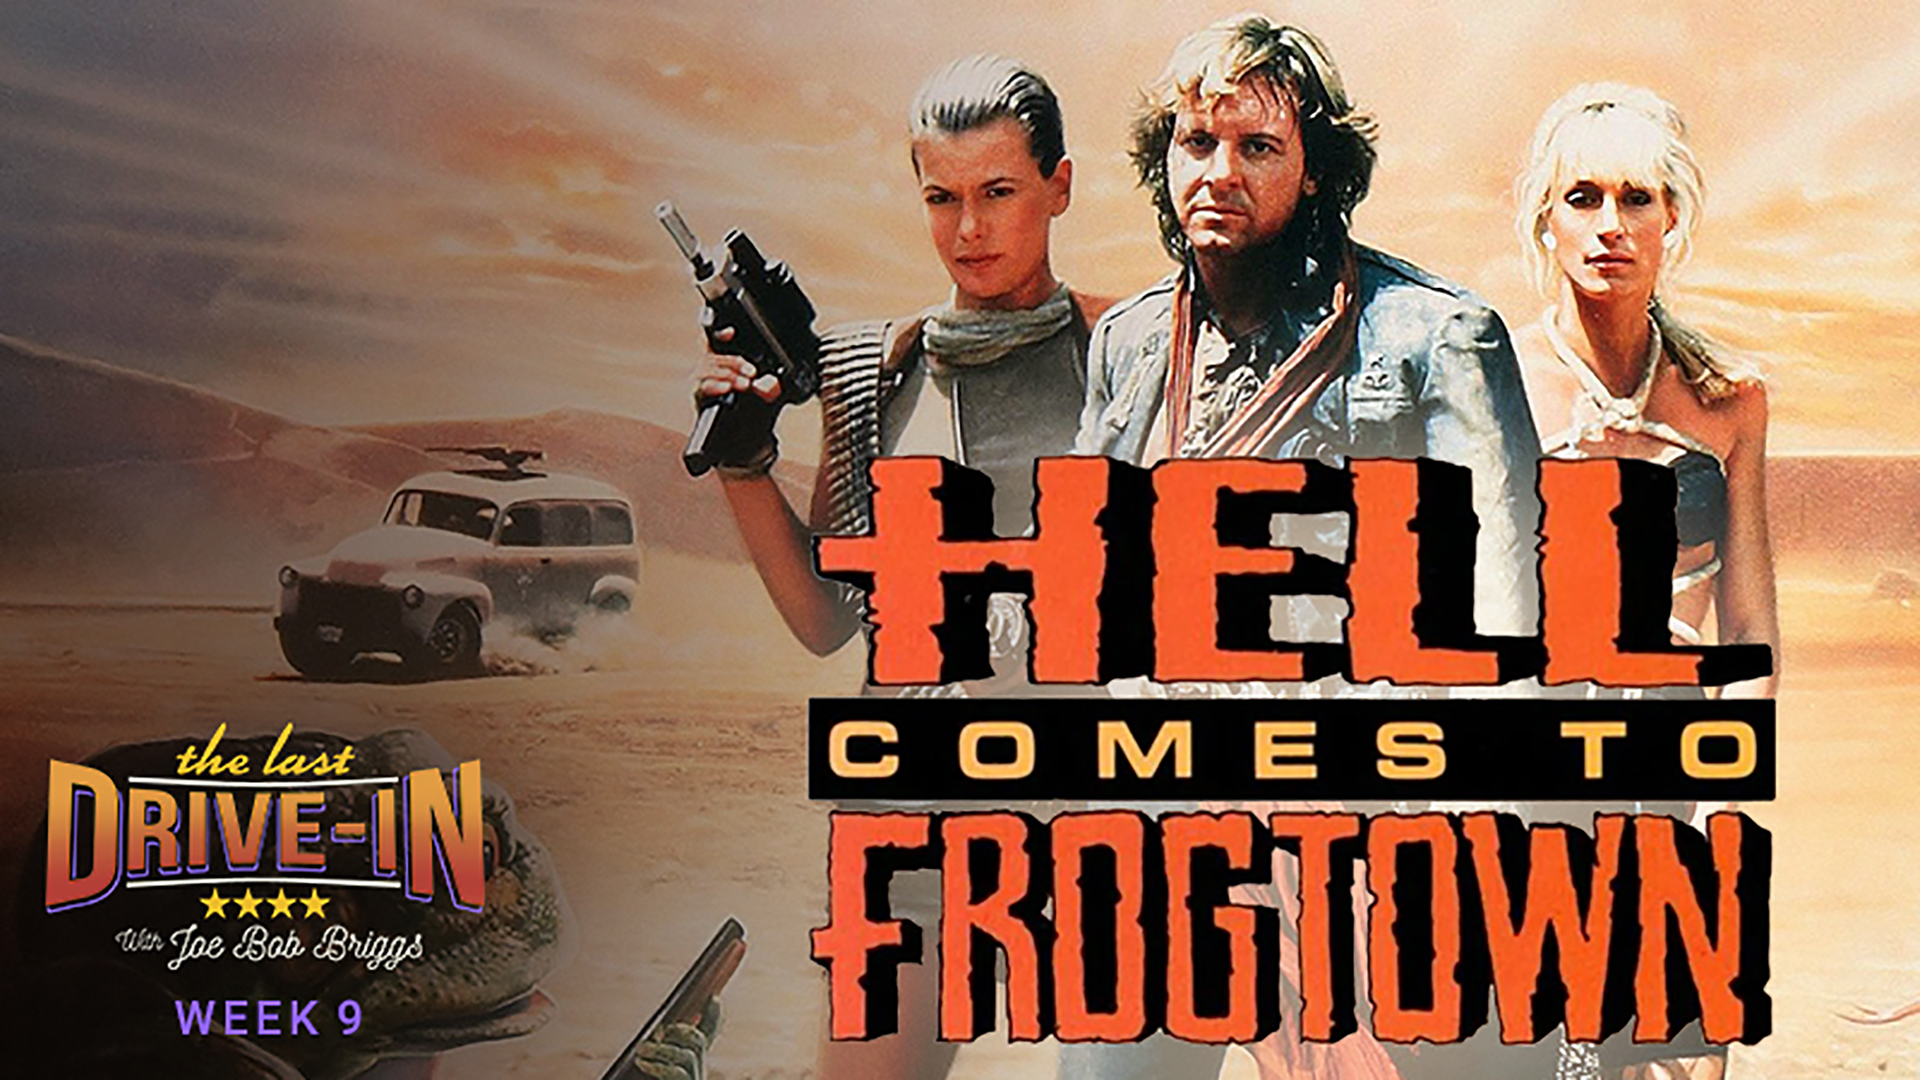 Week 9: Hell Comes to Frogtown, It's up to Sam Hell and the armed and dangerous beauty Spangle to brave the barren wasteland once known as Earth, now ruled by slimy, overgrown amphibians., TV-MA, Season 1028422, Episode 18